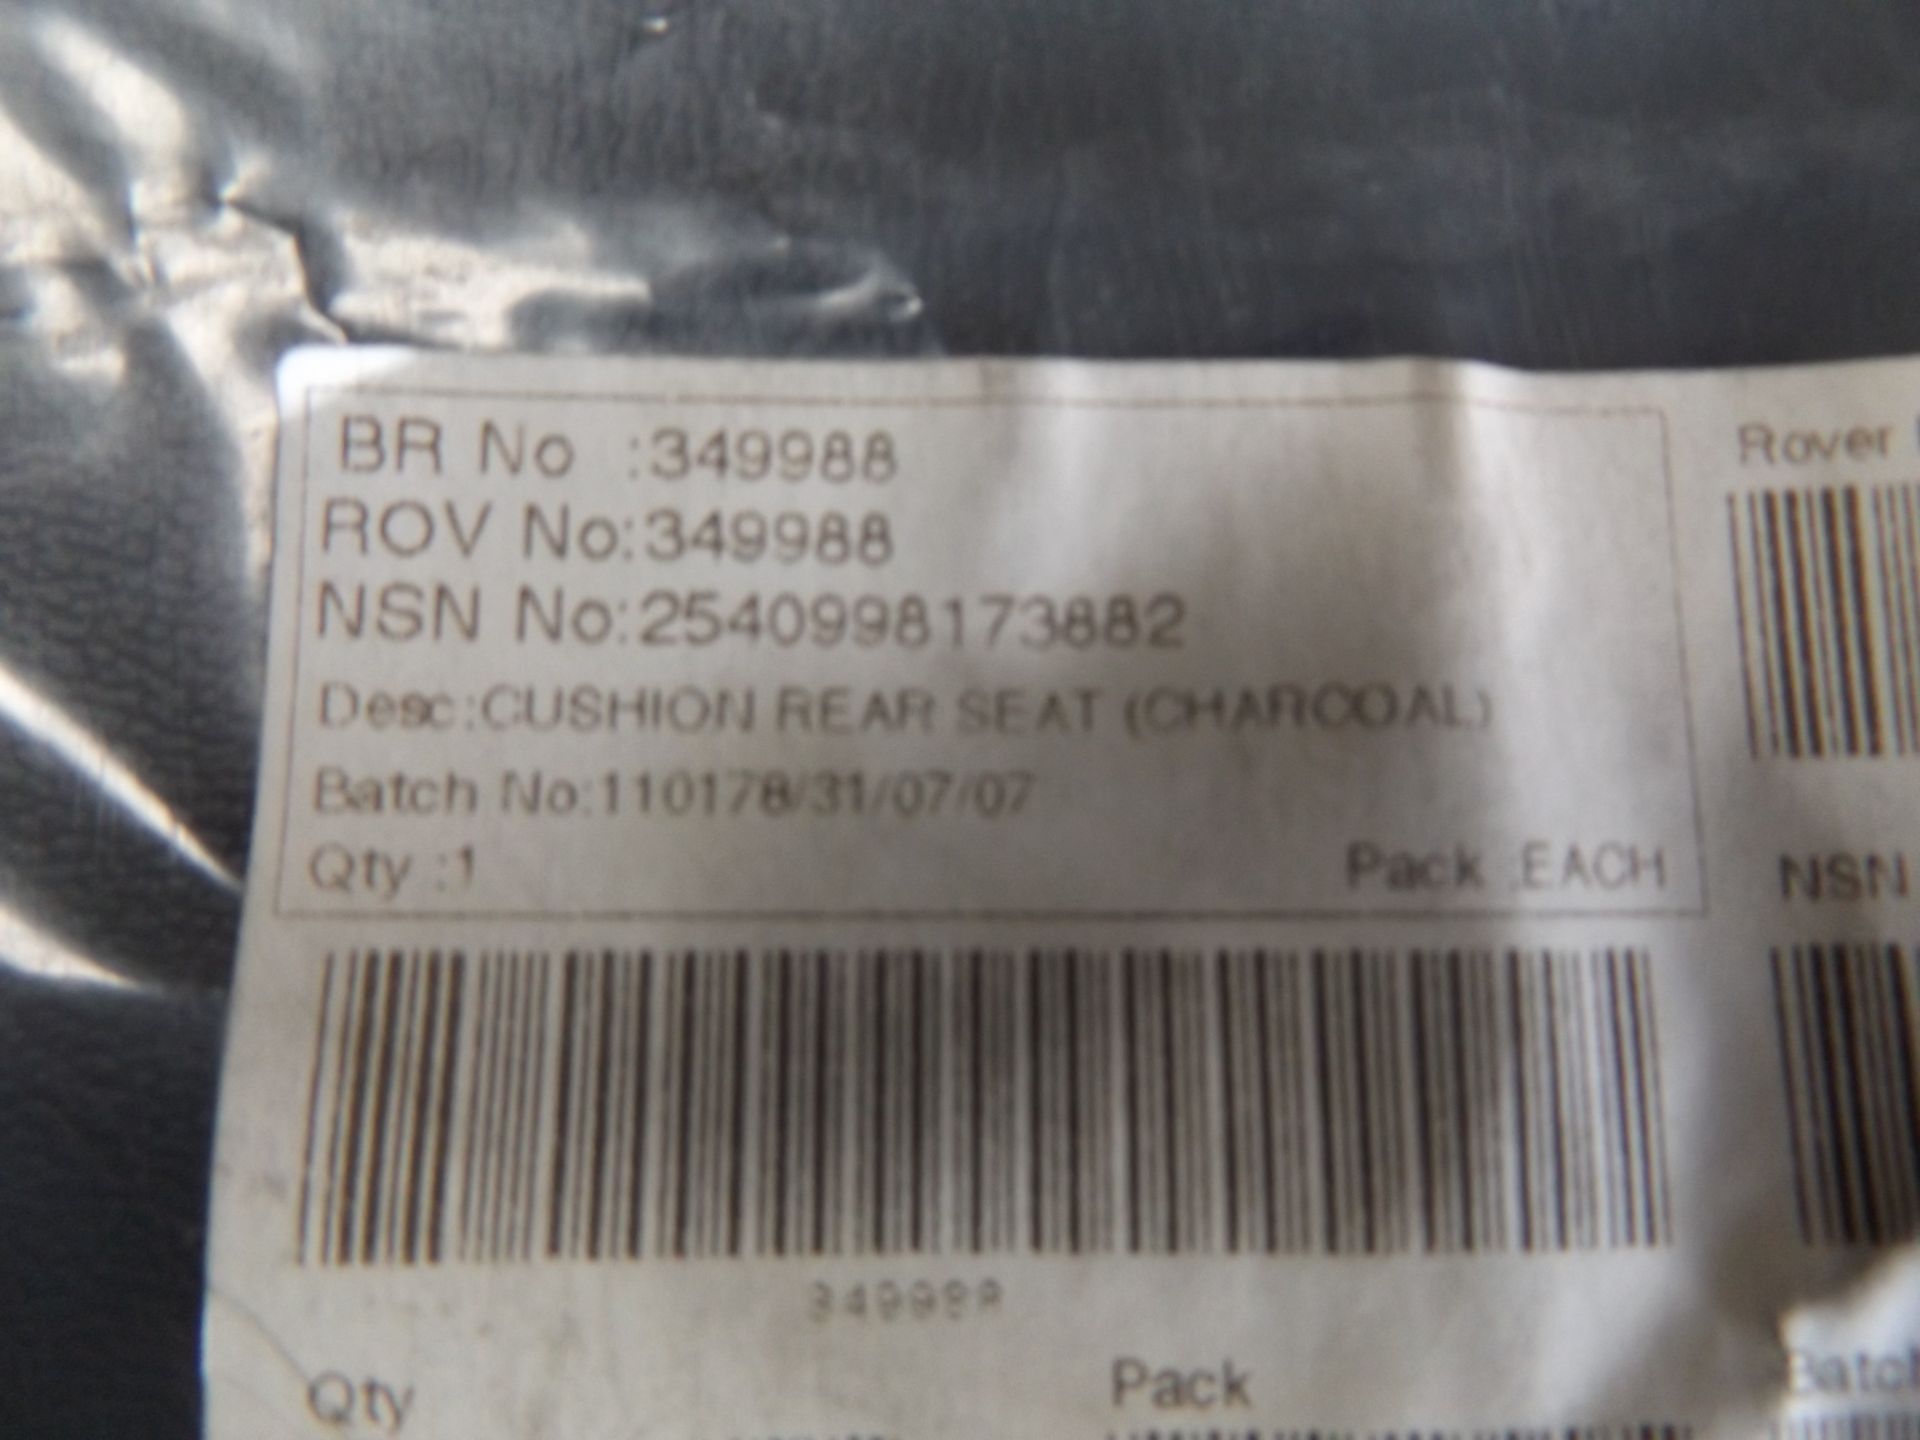 4 x Land Rover Rear Seat Cushions Charcoal P/No 349988 - Image 5 of 6